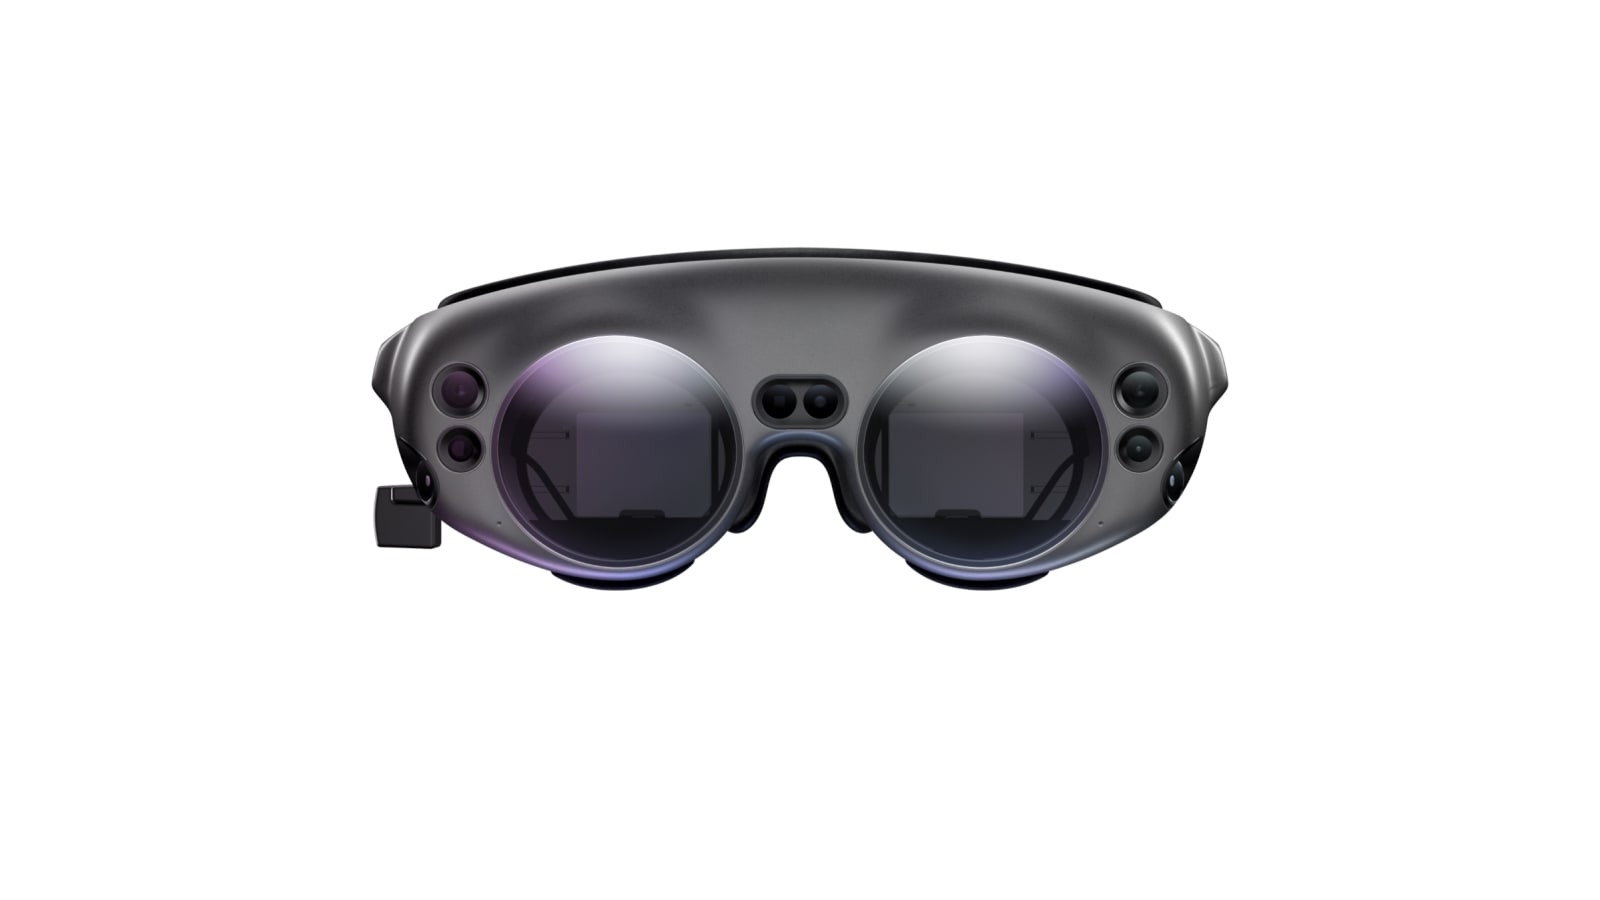 Magic Leap 2 headset merges VR and AR in one device, has spectacular image quality and FOV